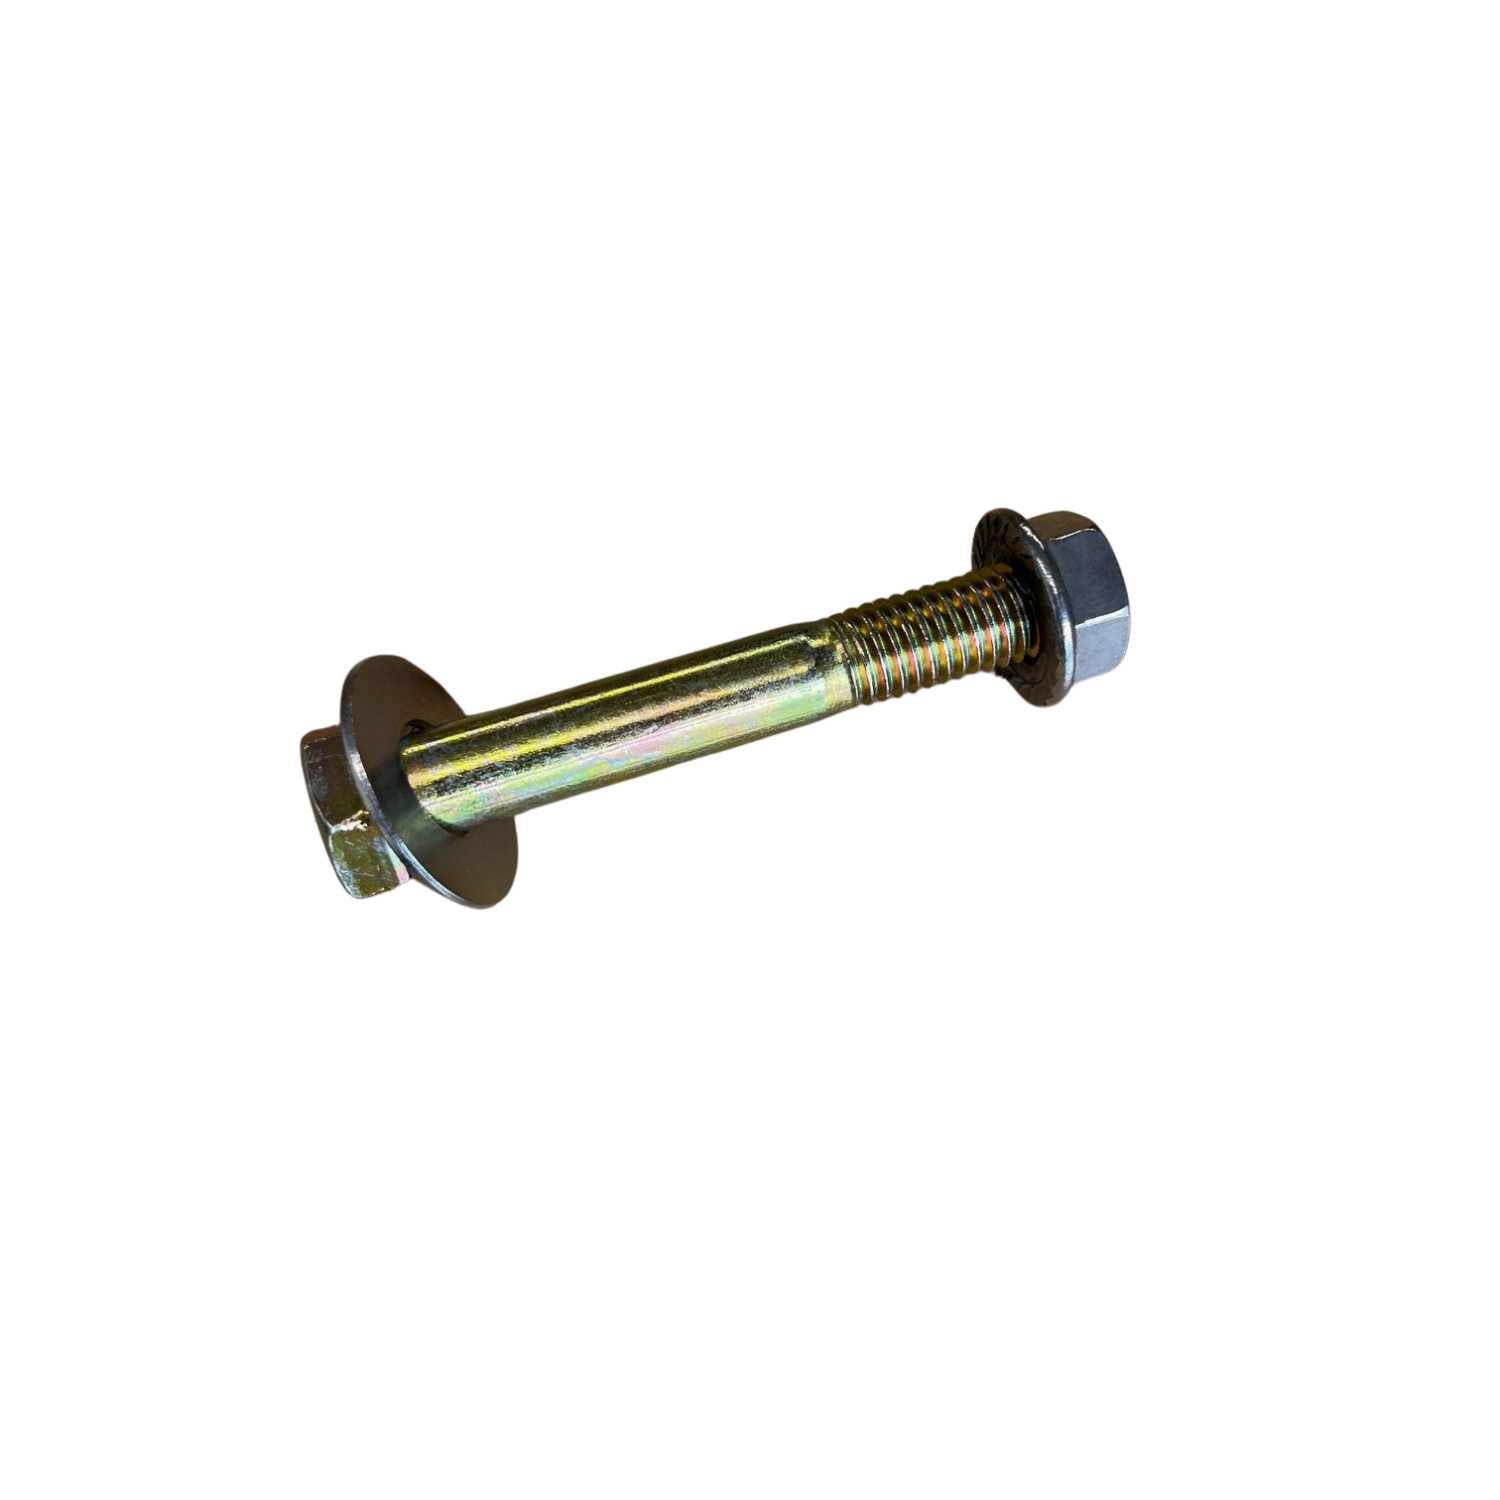 Bolt 3.5 inche with washer and nut for rack base